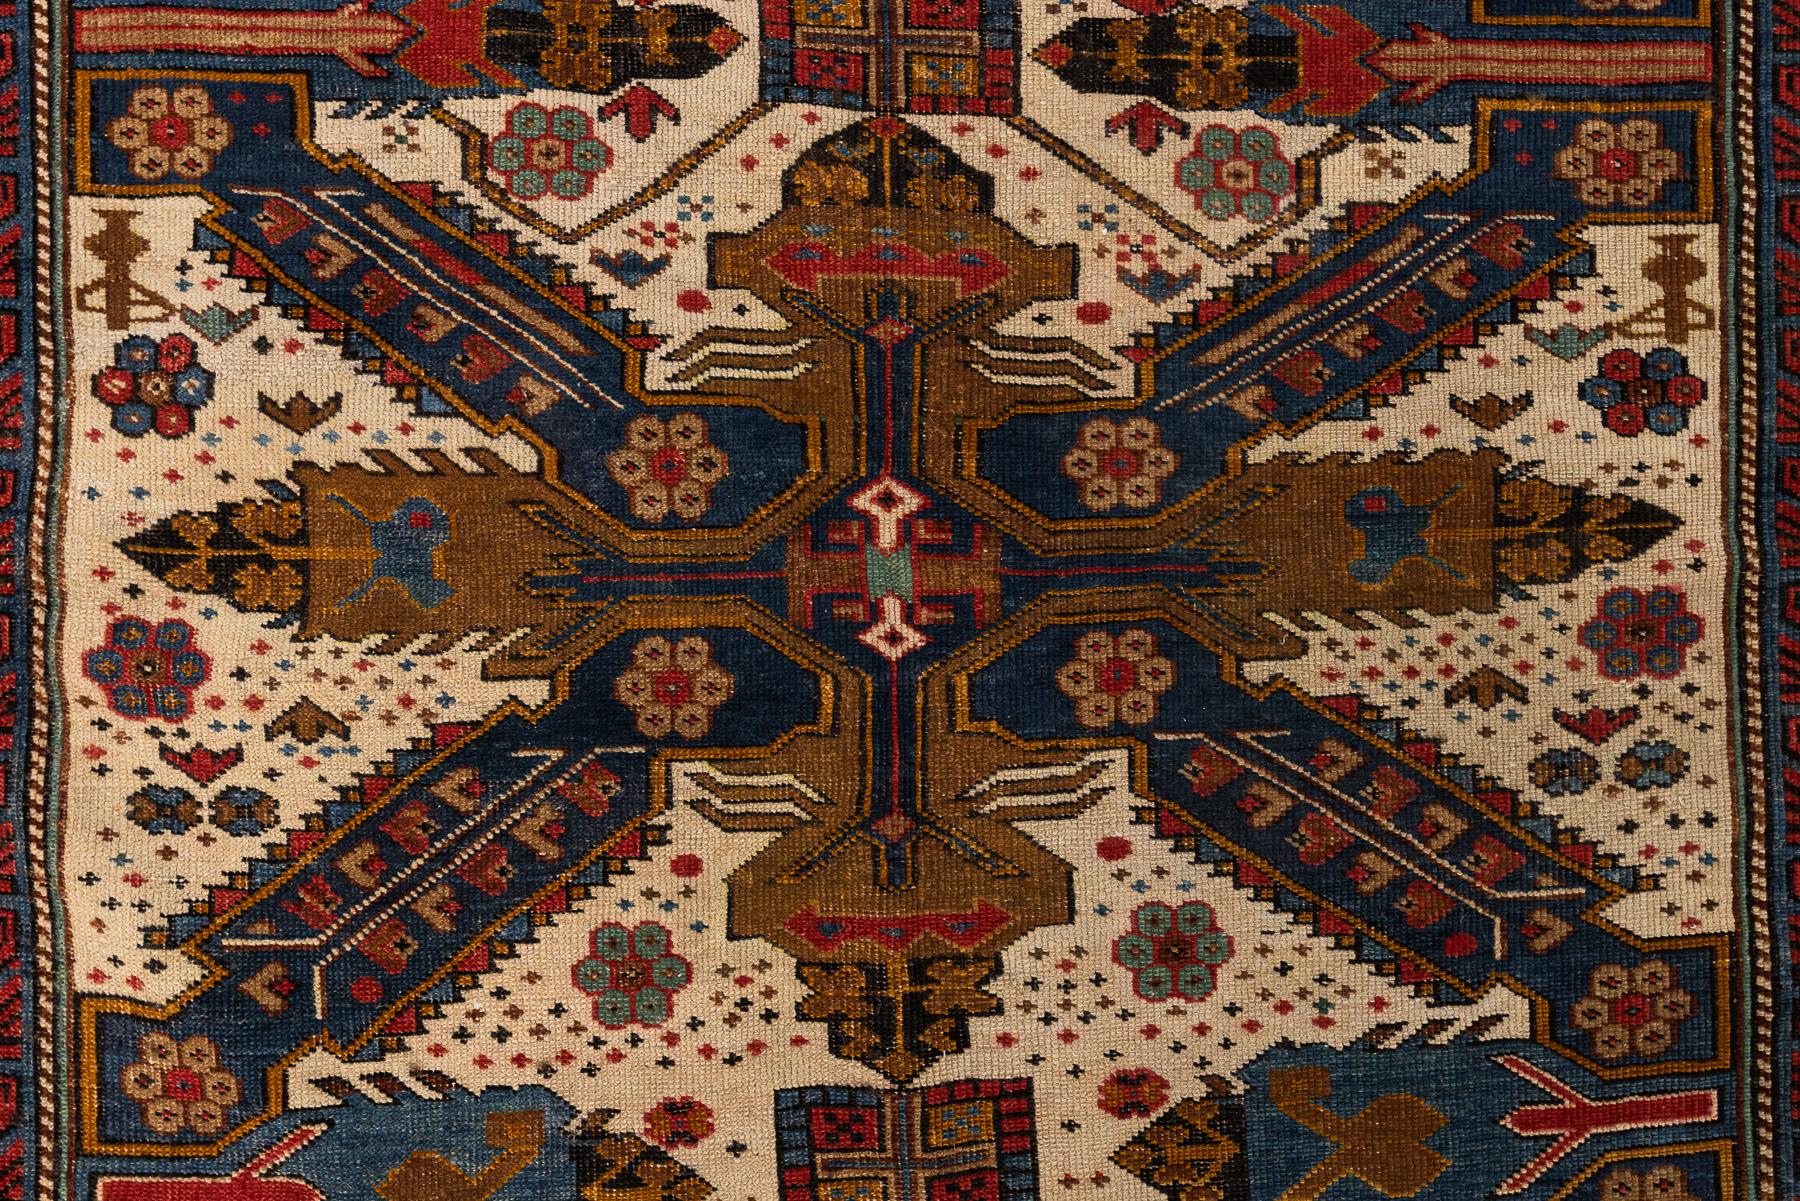 Seychour – Kuba, Northeast Caucasus

The tradition of Seichour rugs from Kuba features a variety of visual formats, the most emblematic design being the compressed cross of Saint Andrew. In this rug, a series of this motif is lined up among the